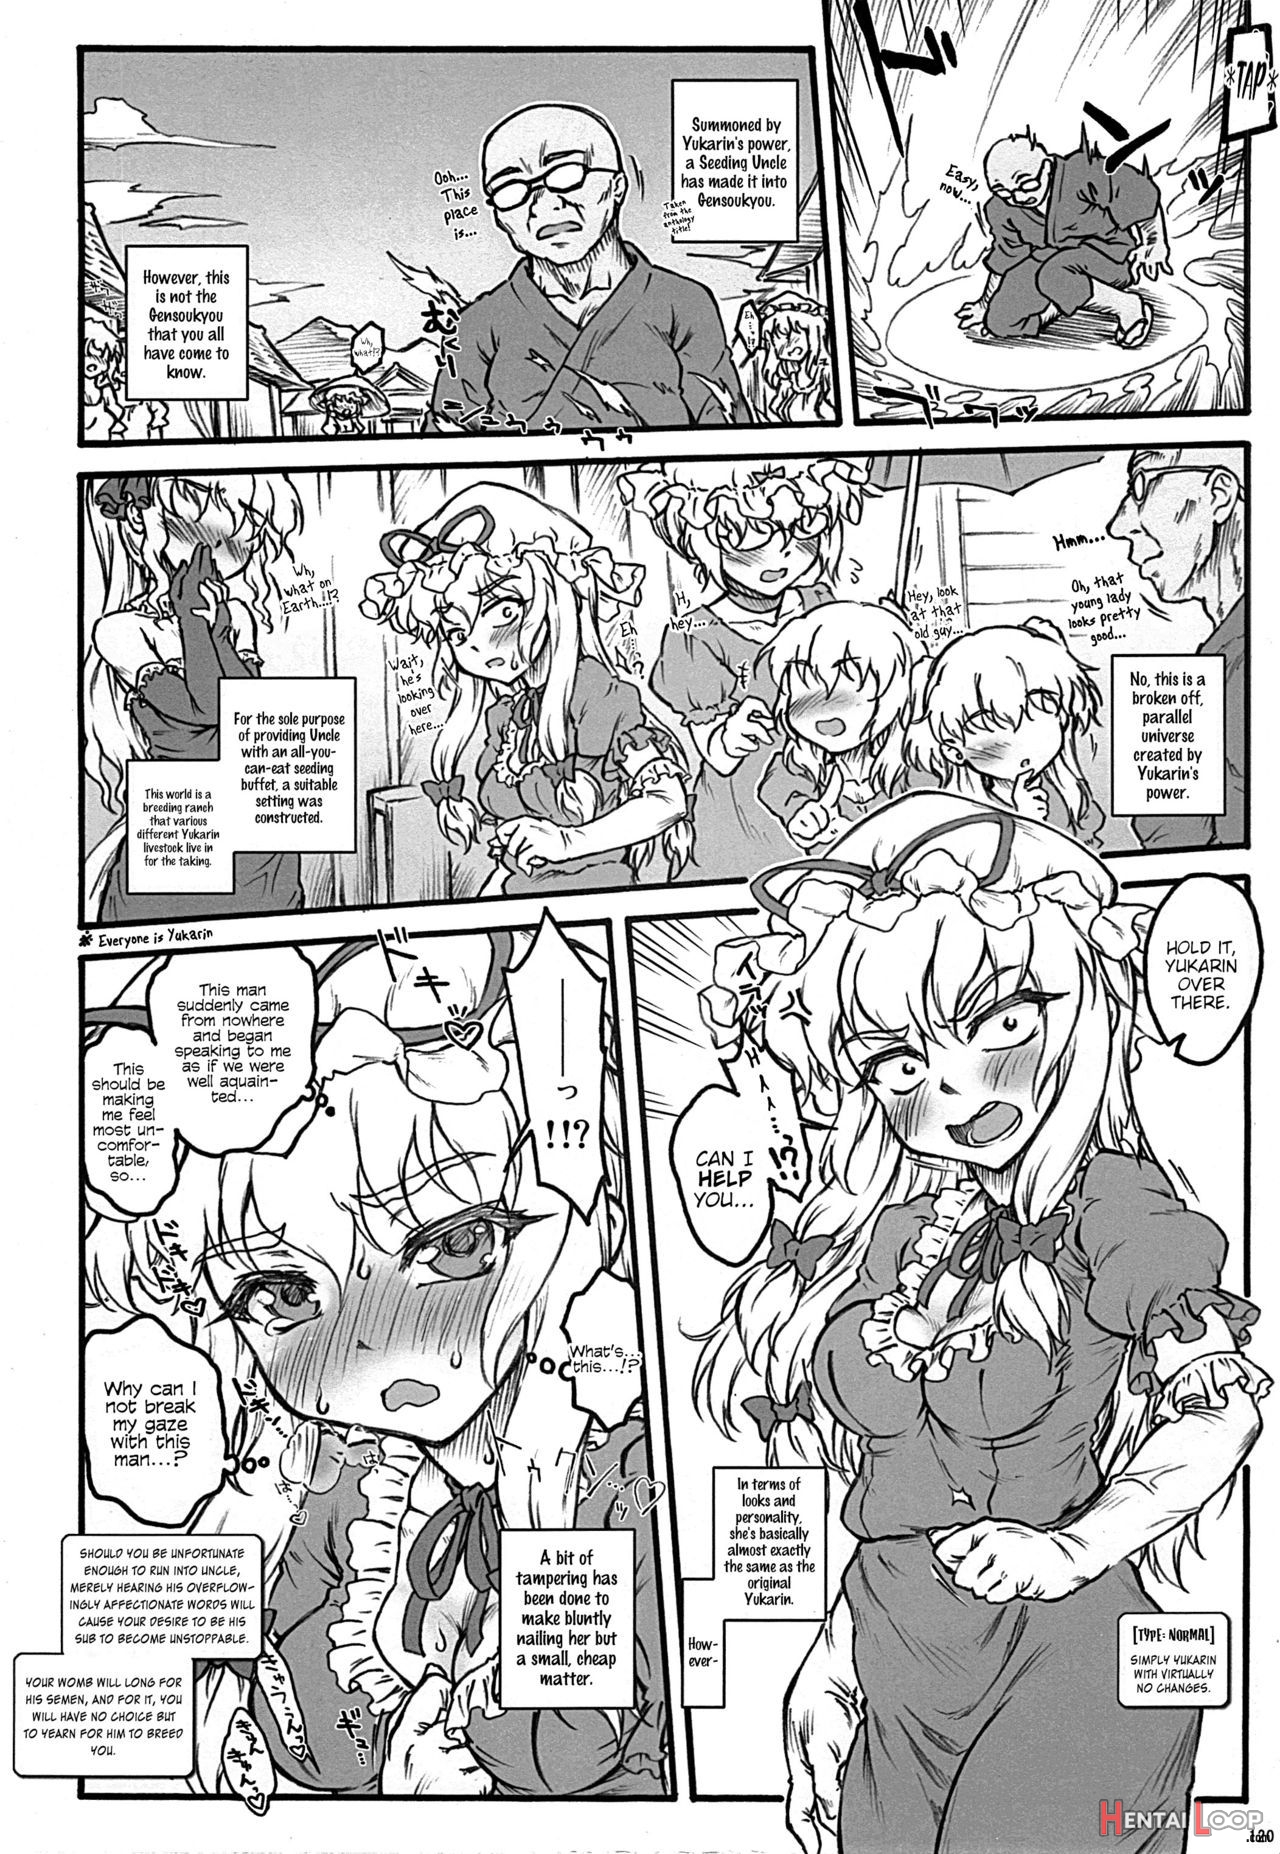 Hooray! A Seeding Uncle Has Made It Into Gensoukyou page 120